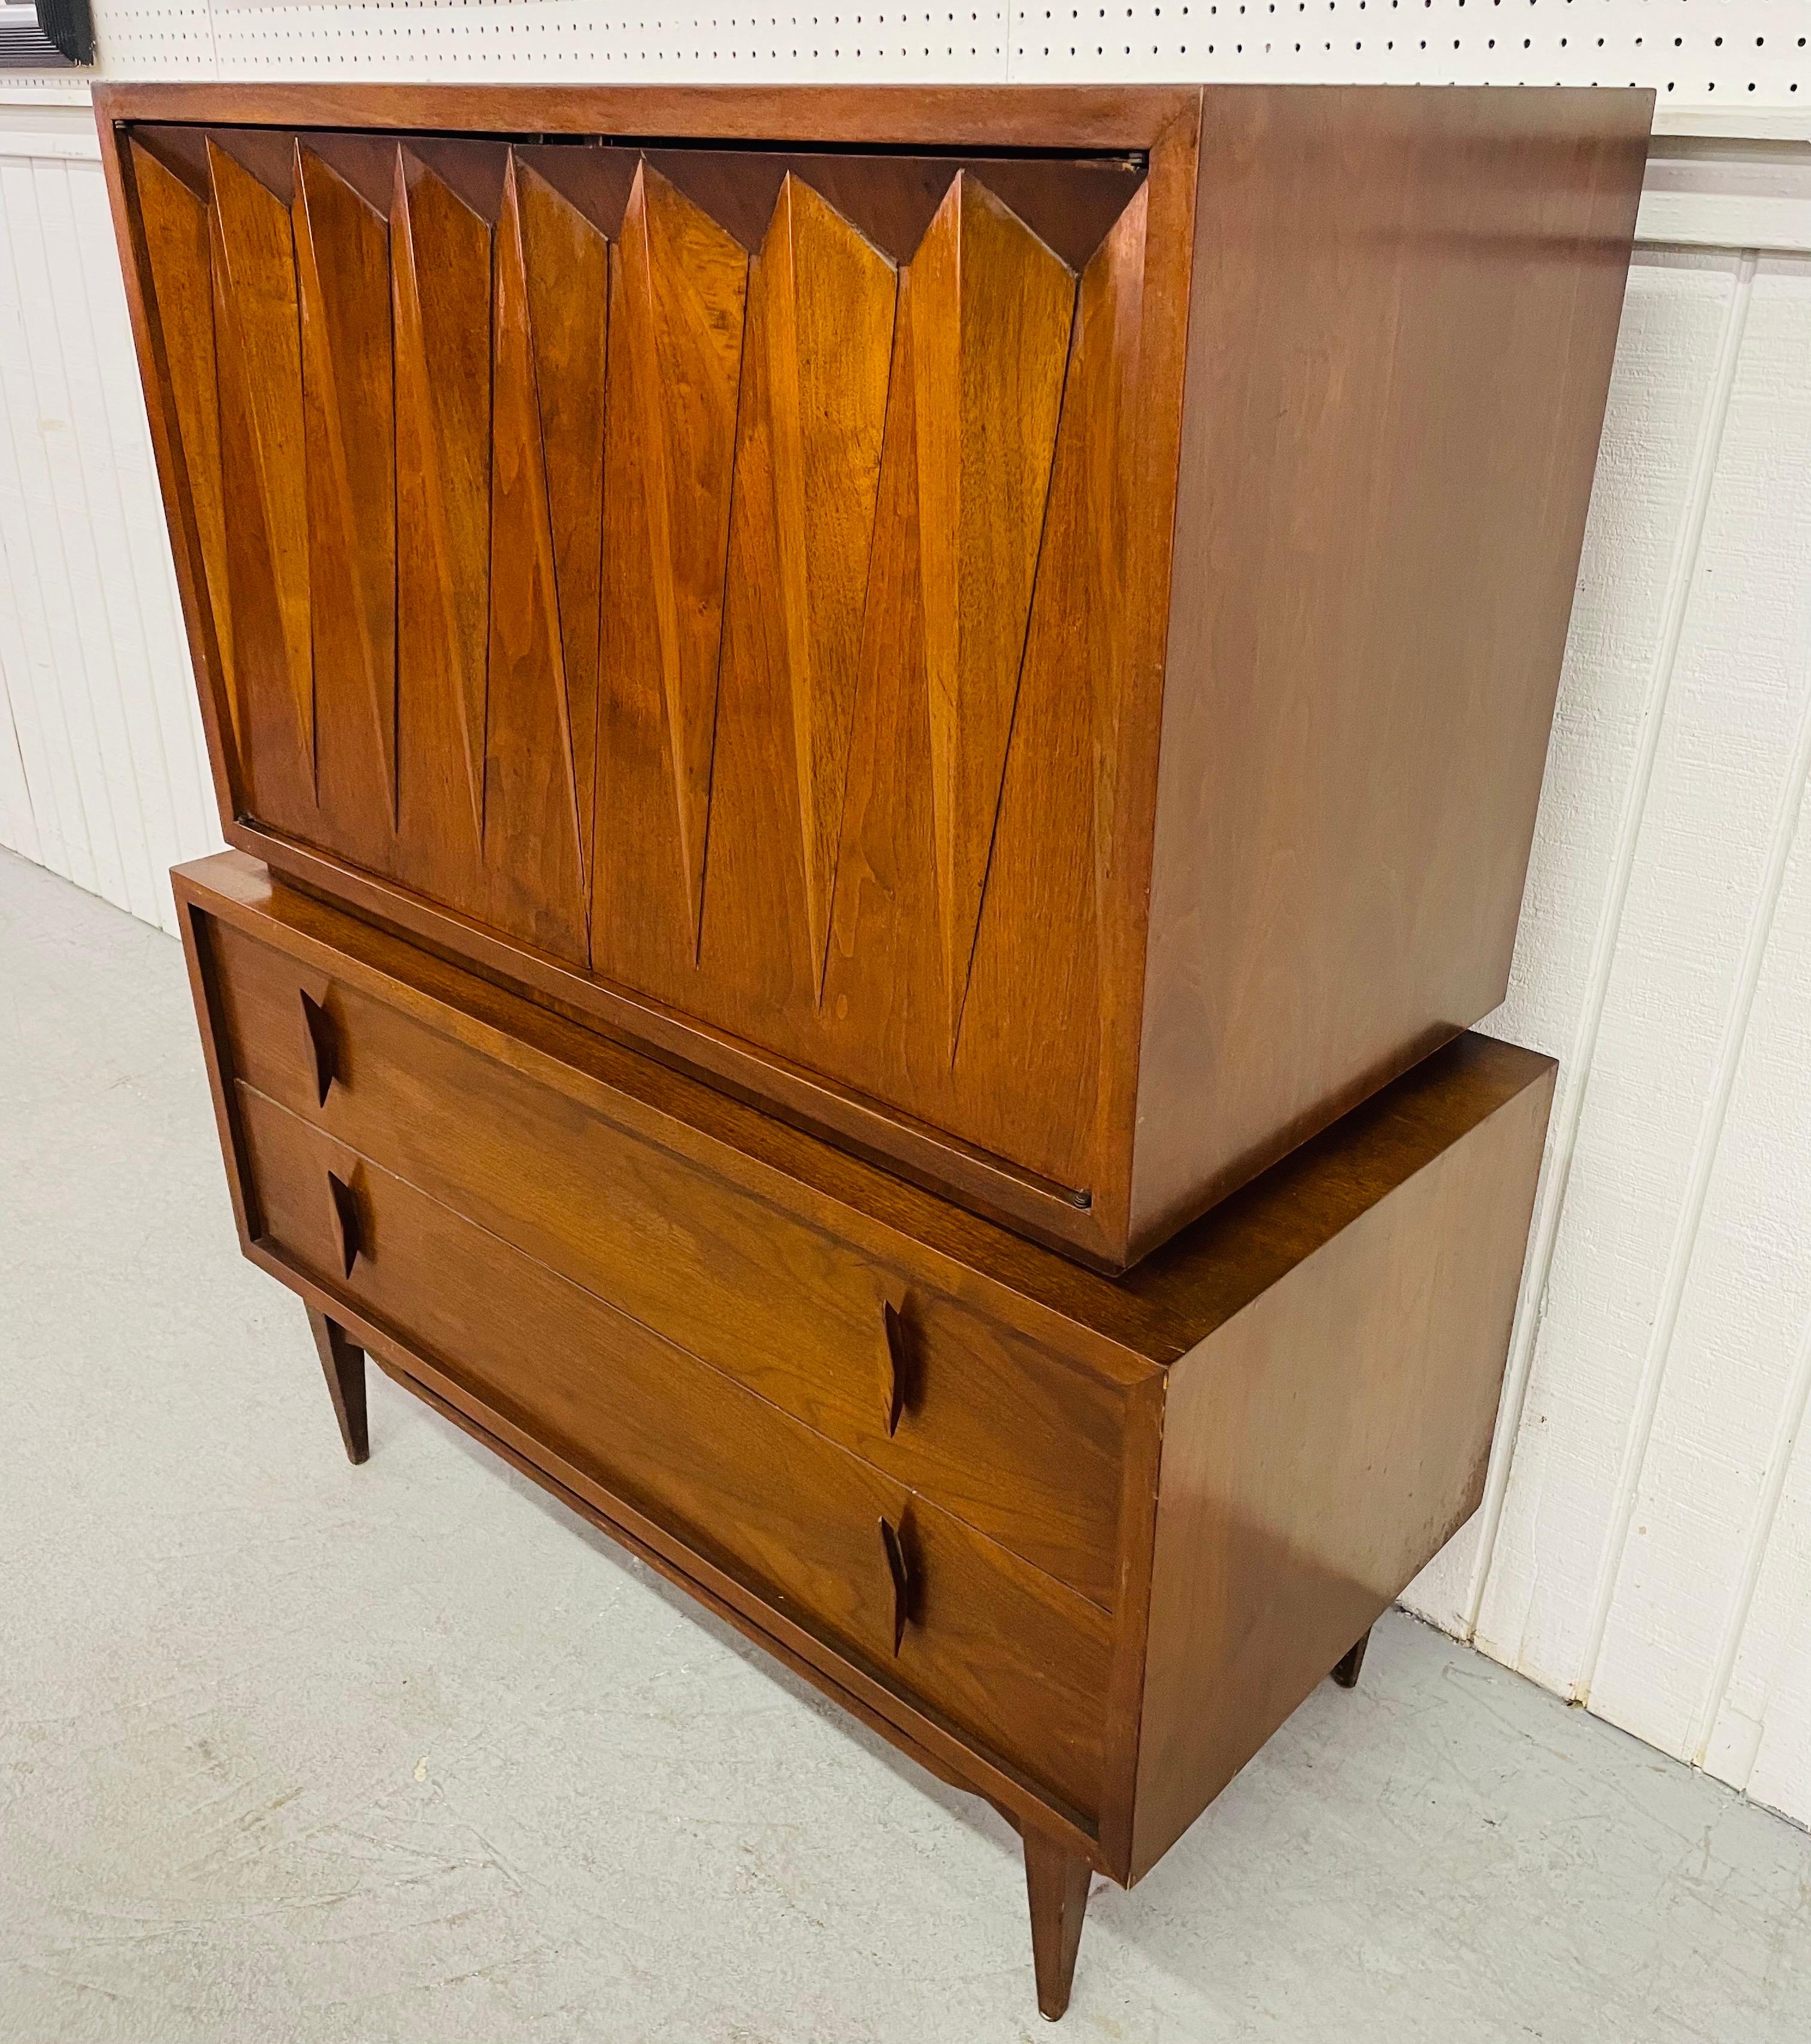 This listing is for a Mid-Century Albert Parvin Walnut High Chest. Featuring a chest on chest design, two diamond shaped doors that open up to three hidden drawers, two drawers at the bottom, original diamond shaped walnut pulls, and a beautiful